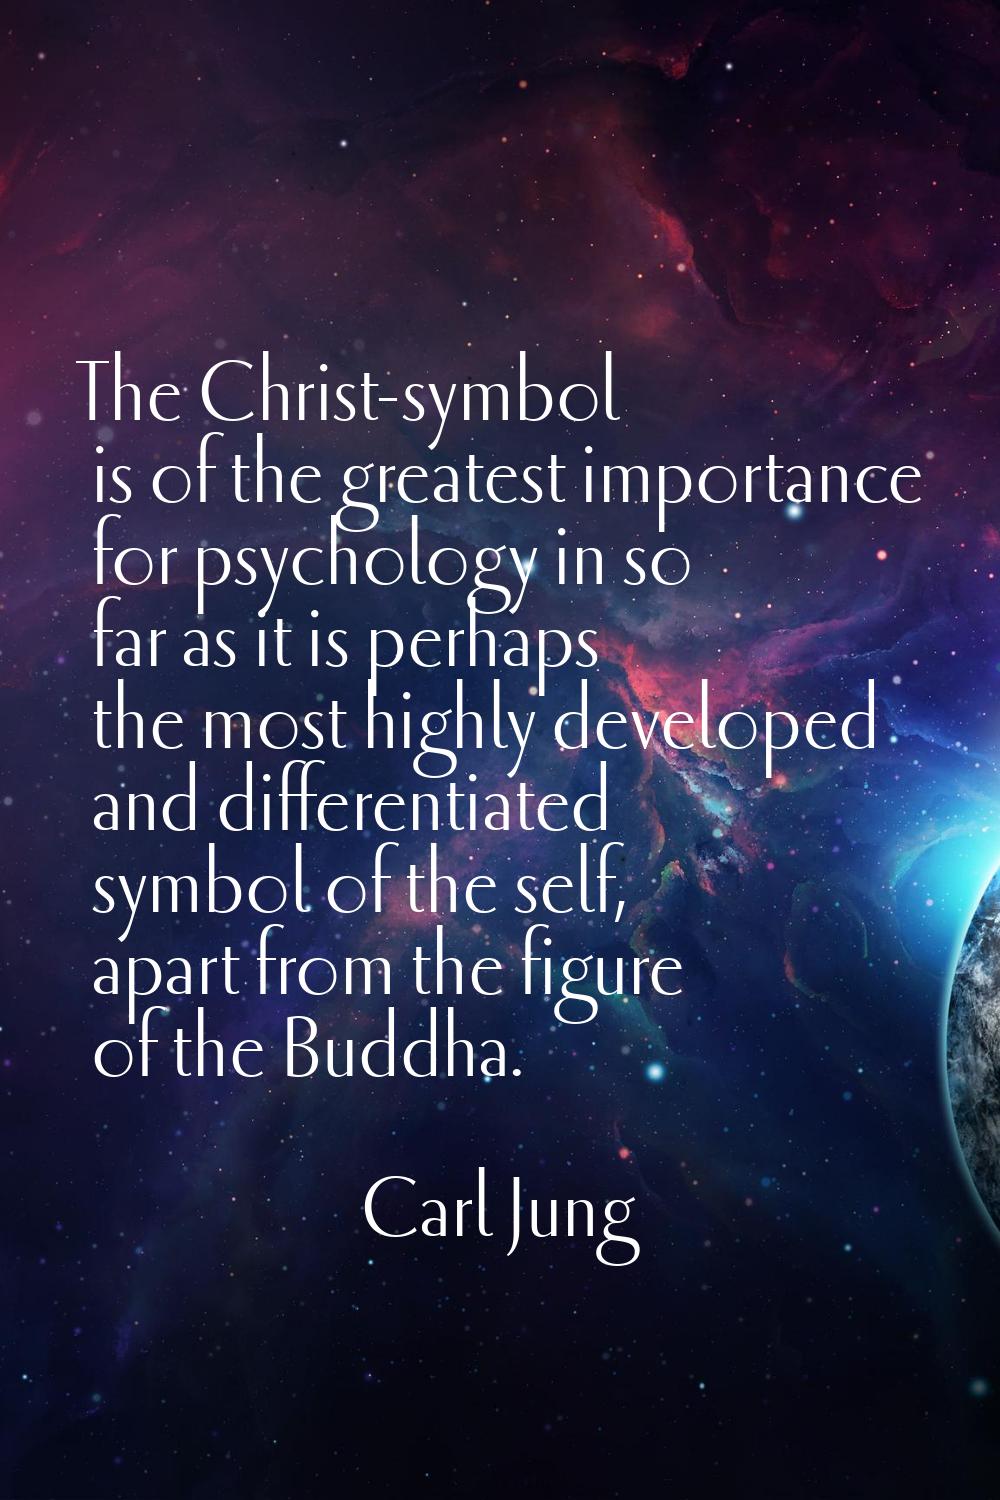 The Christ-symbol is of the greatest importance for psychology in so far as it is perhaps the most 